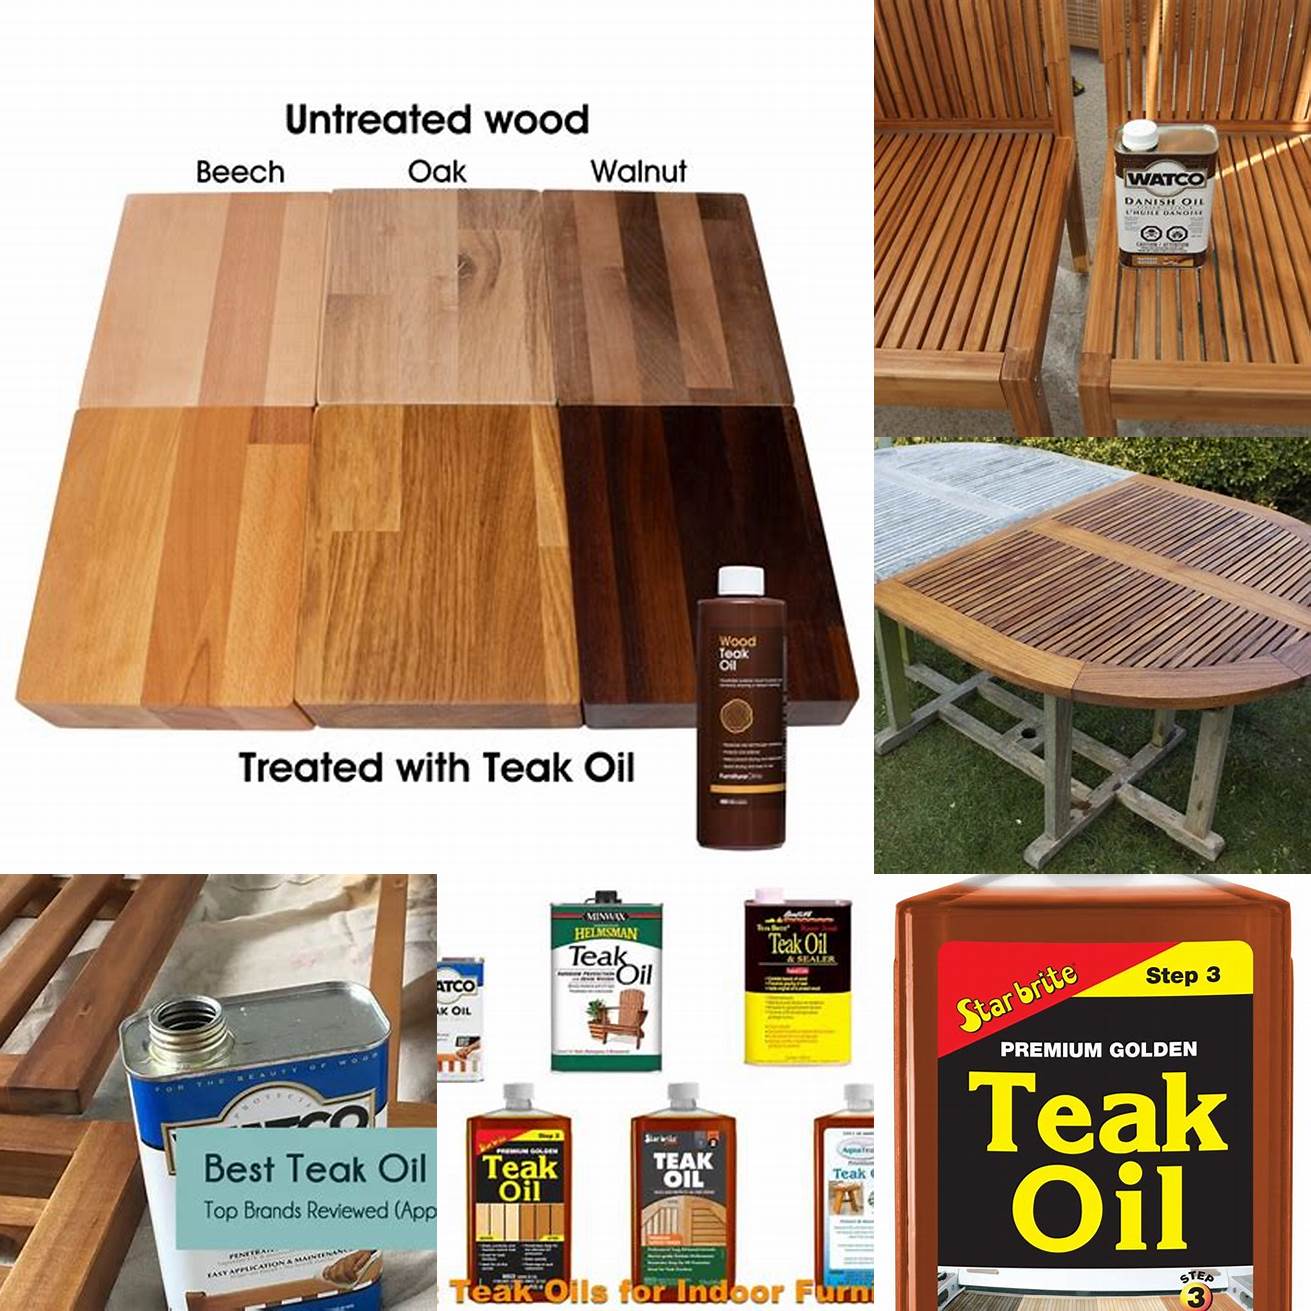 Photos of different types of teak oil